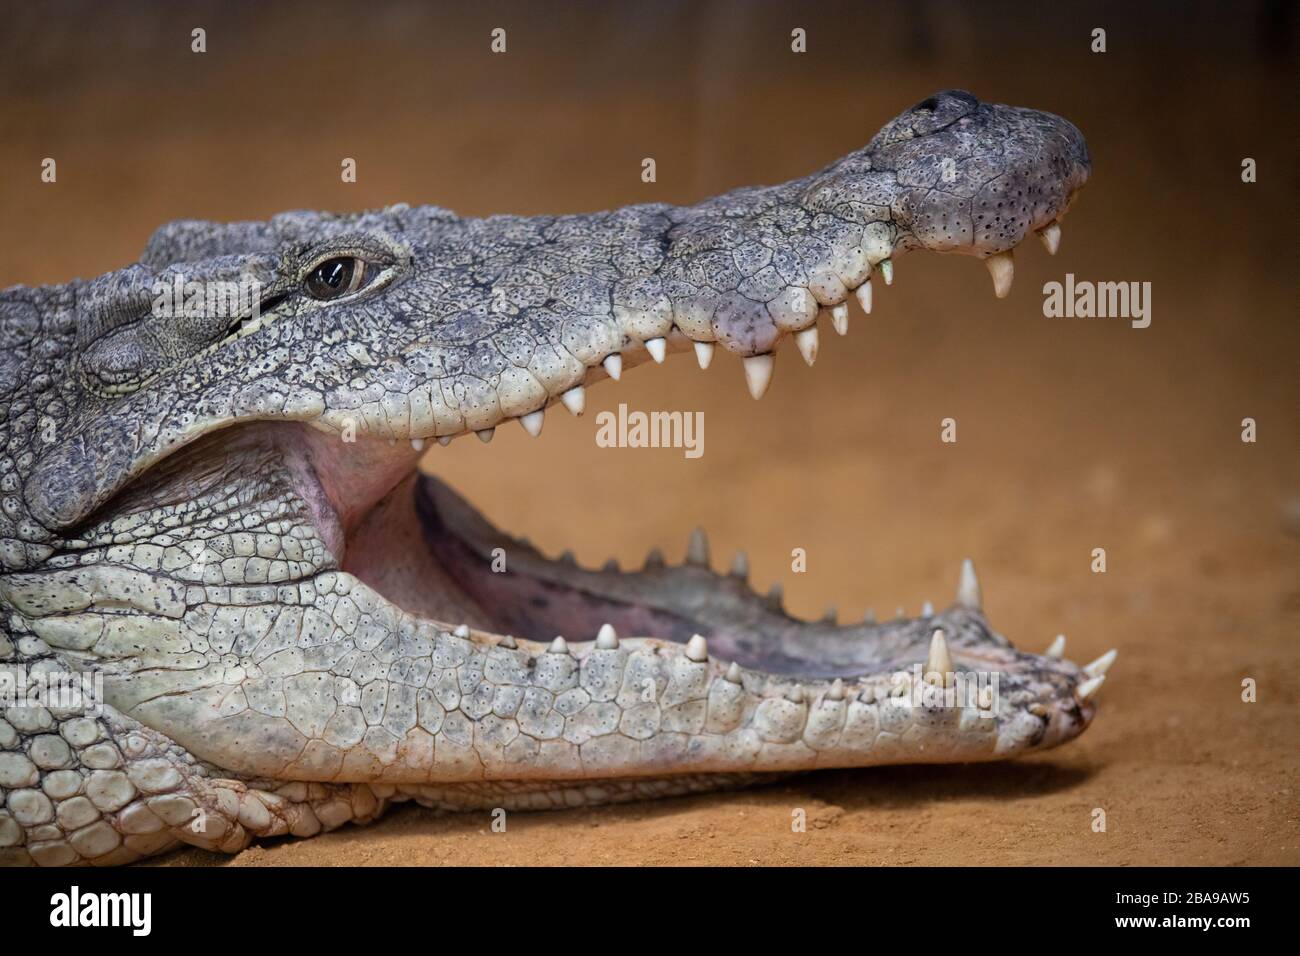 Portrait of a nile crocodile with open mouth resting on the sand Stock Photo